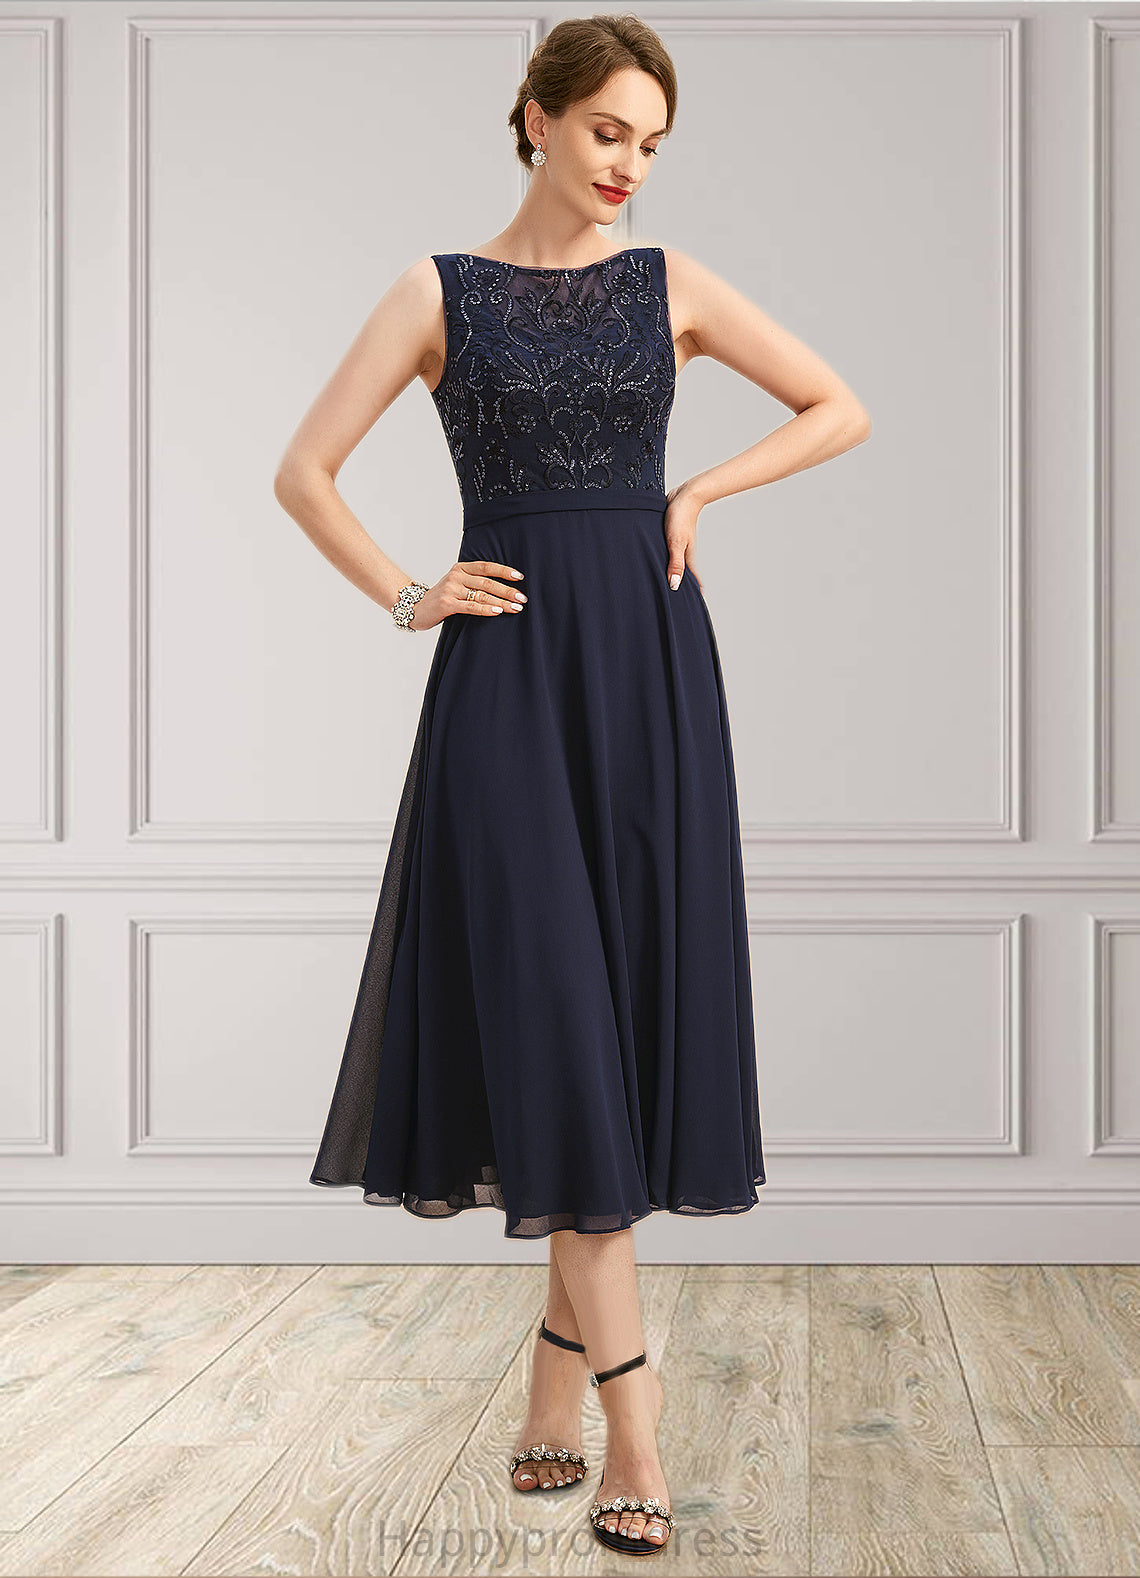 Isabella A-line Boat Neck Illusion Tea-Length Chiffon Lace Mother of the Bride Dress With Sequins XXSP0021658